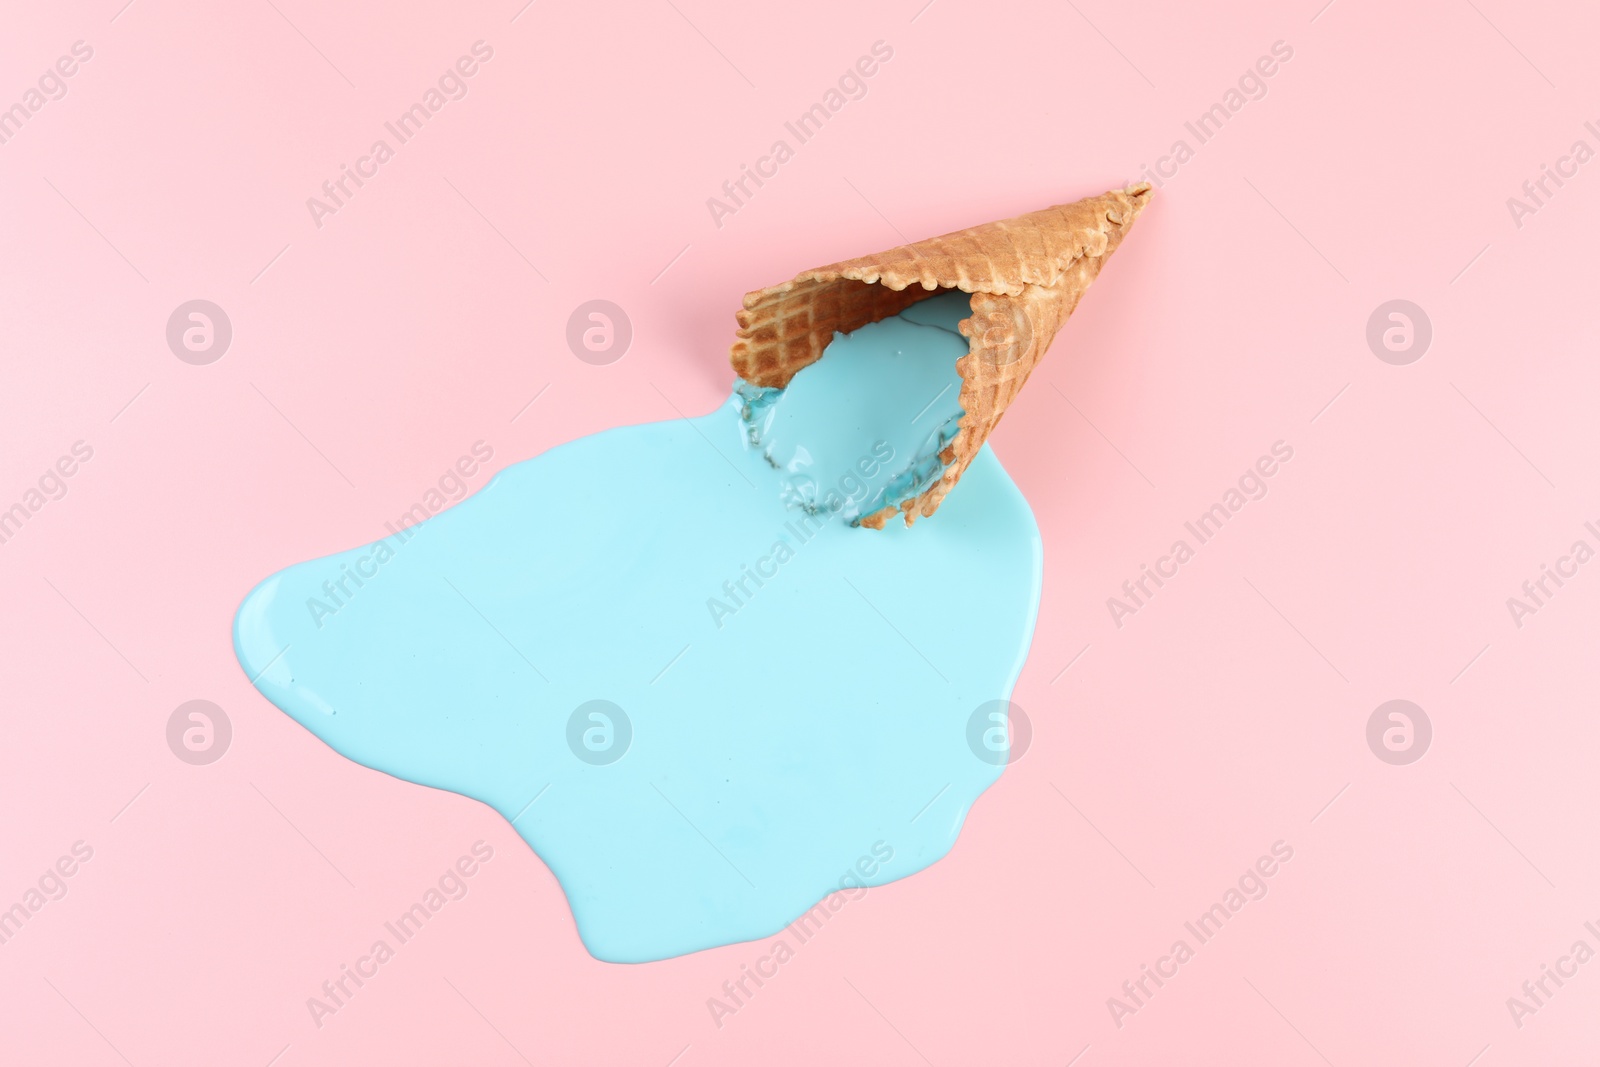 Photo of Melted ice cream and wafer cone on pink background, top view